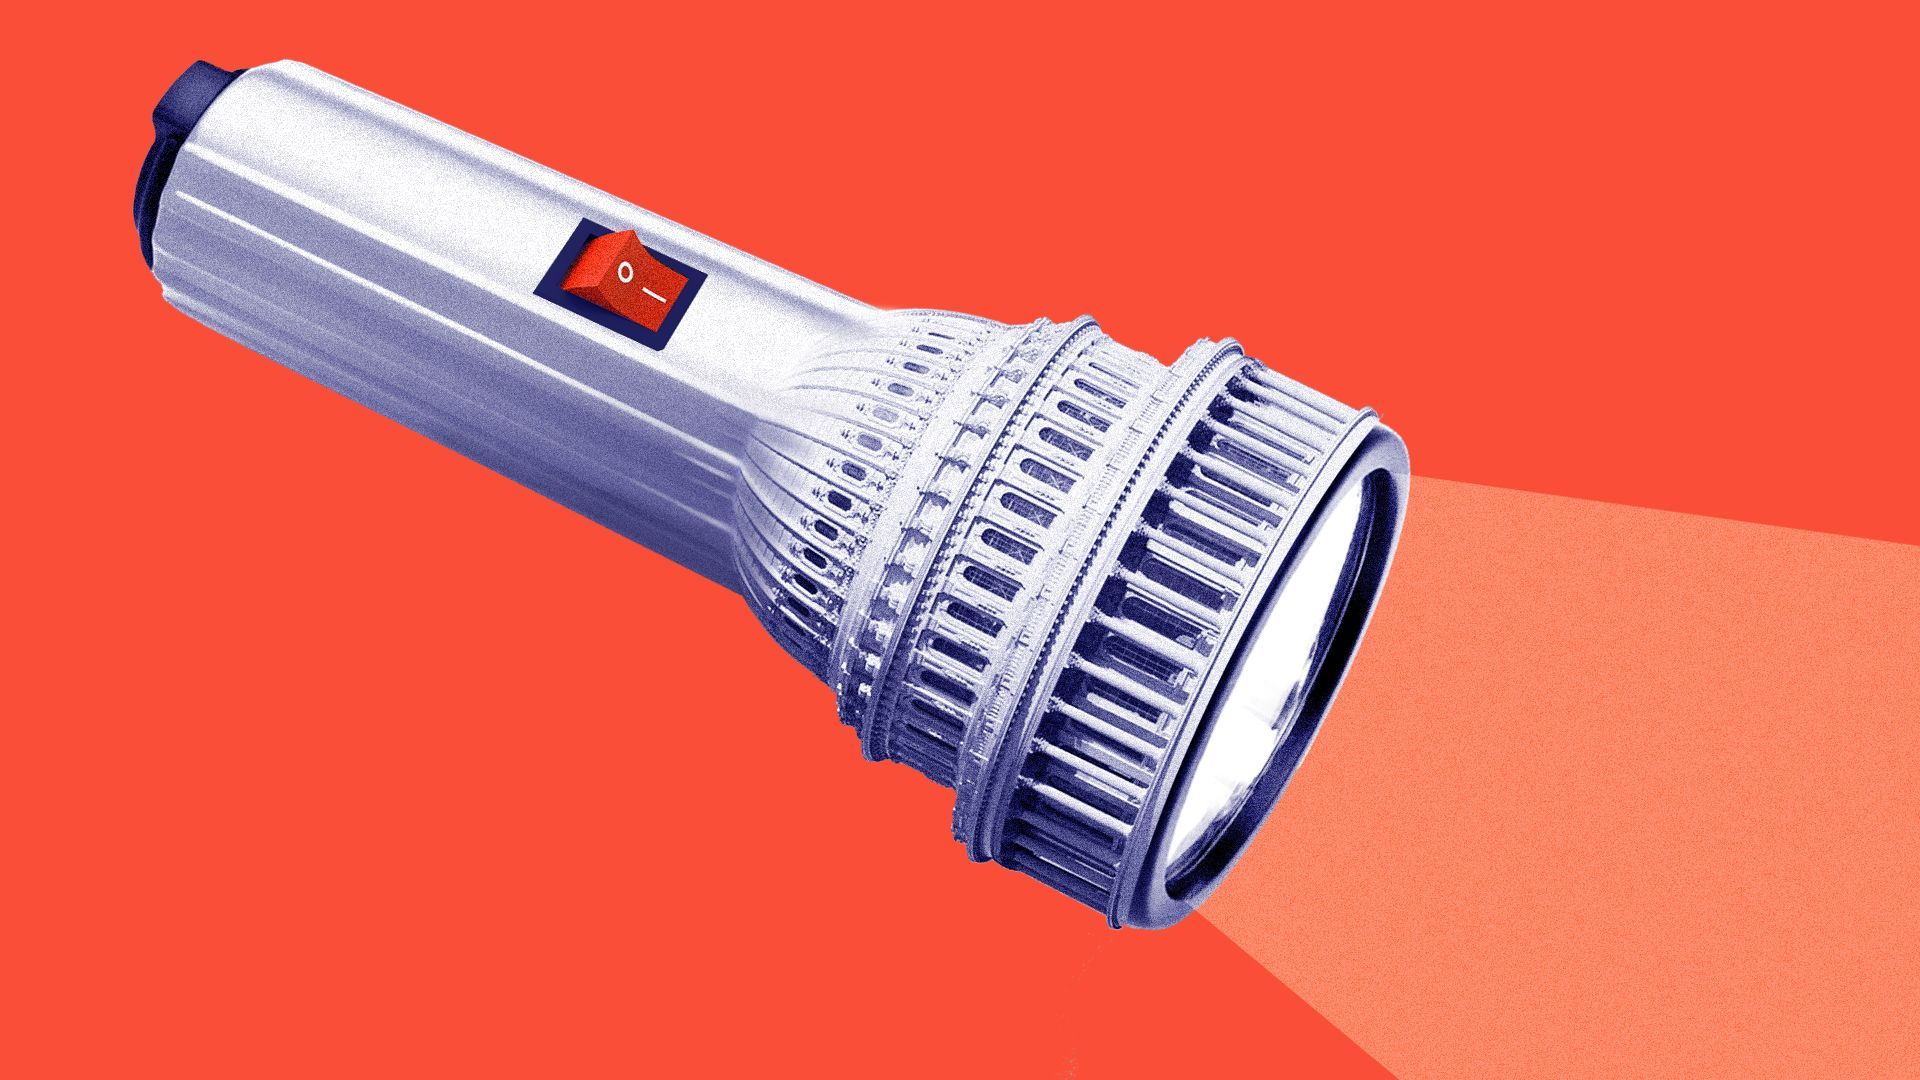 Illustration of a flashlight in the shape of the U.S. Capitol.